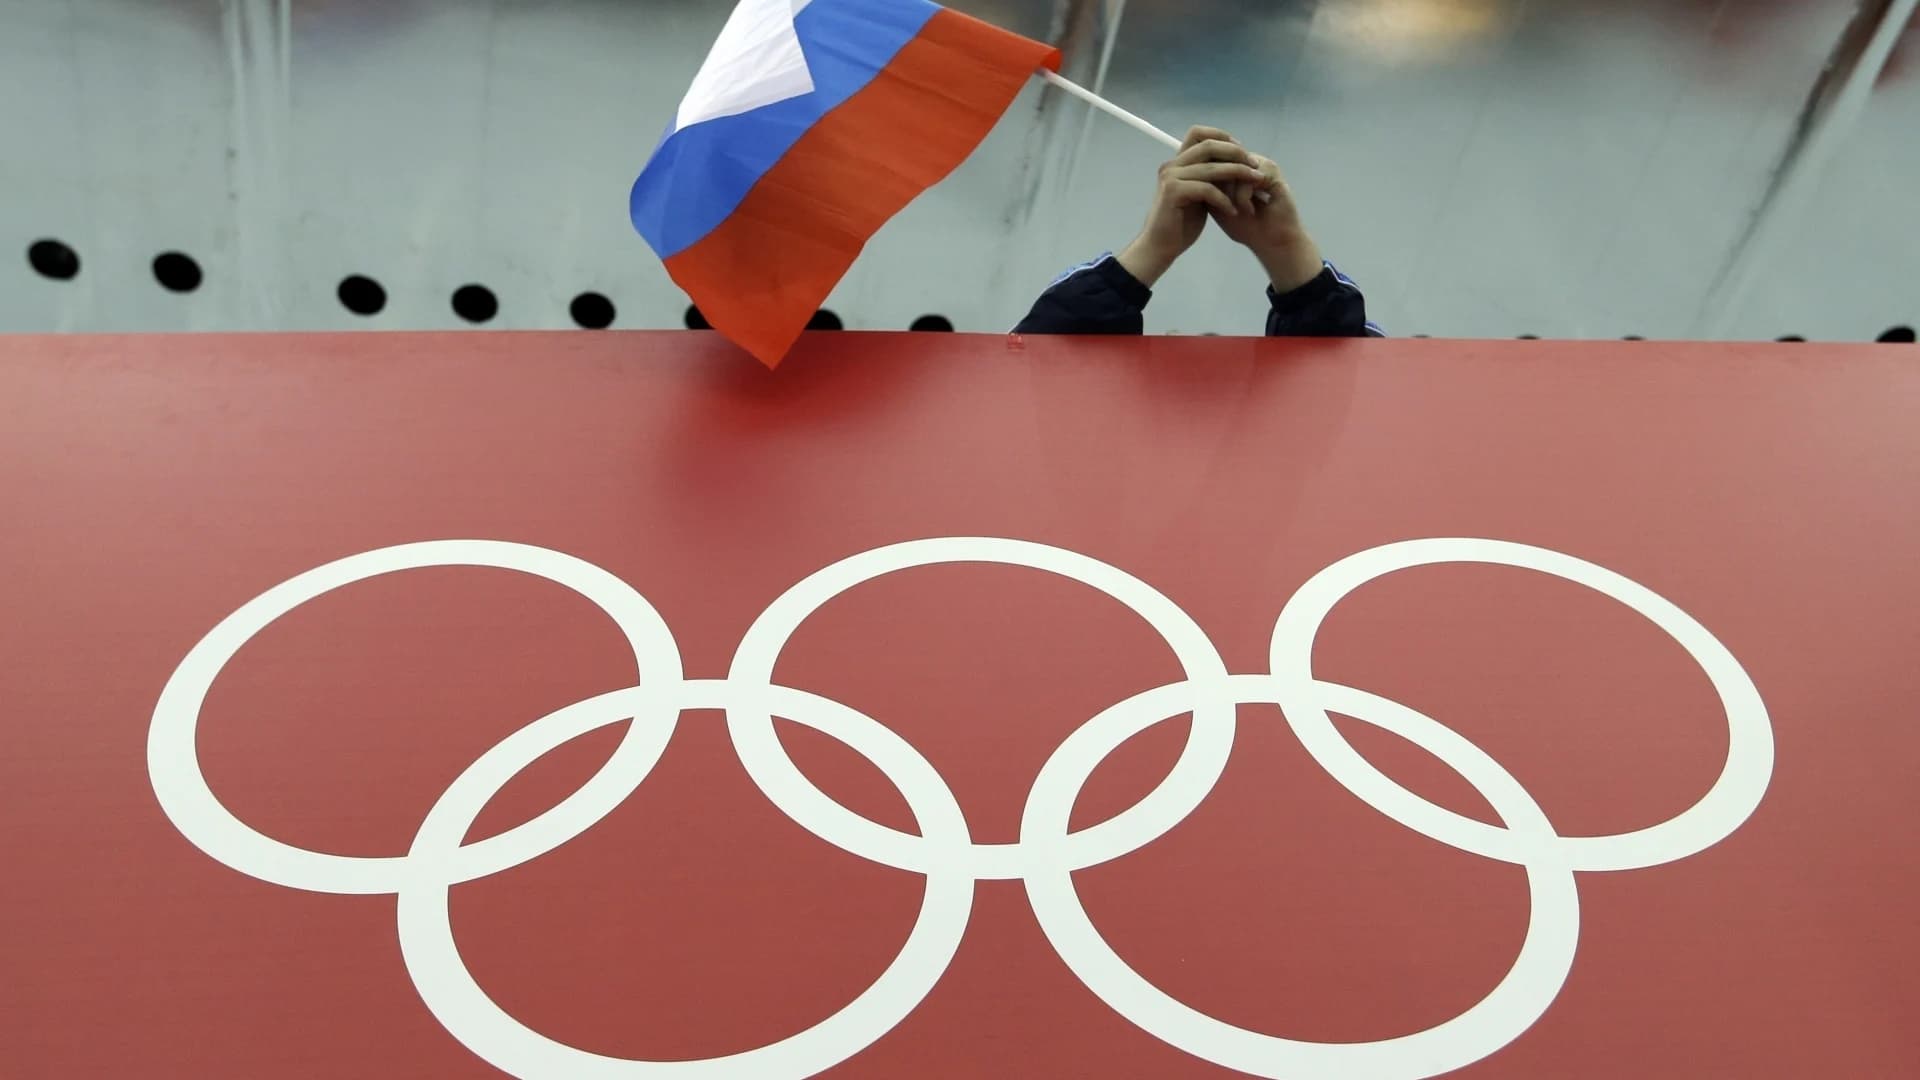 Russia excluded from more sports as sanctions mount